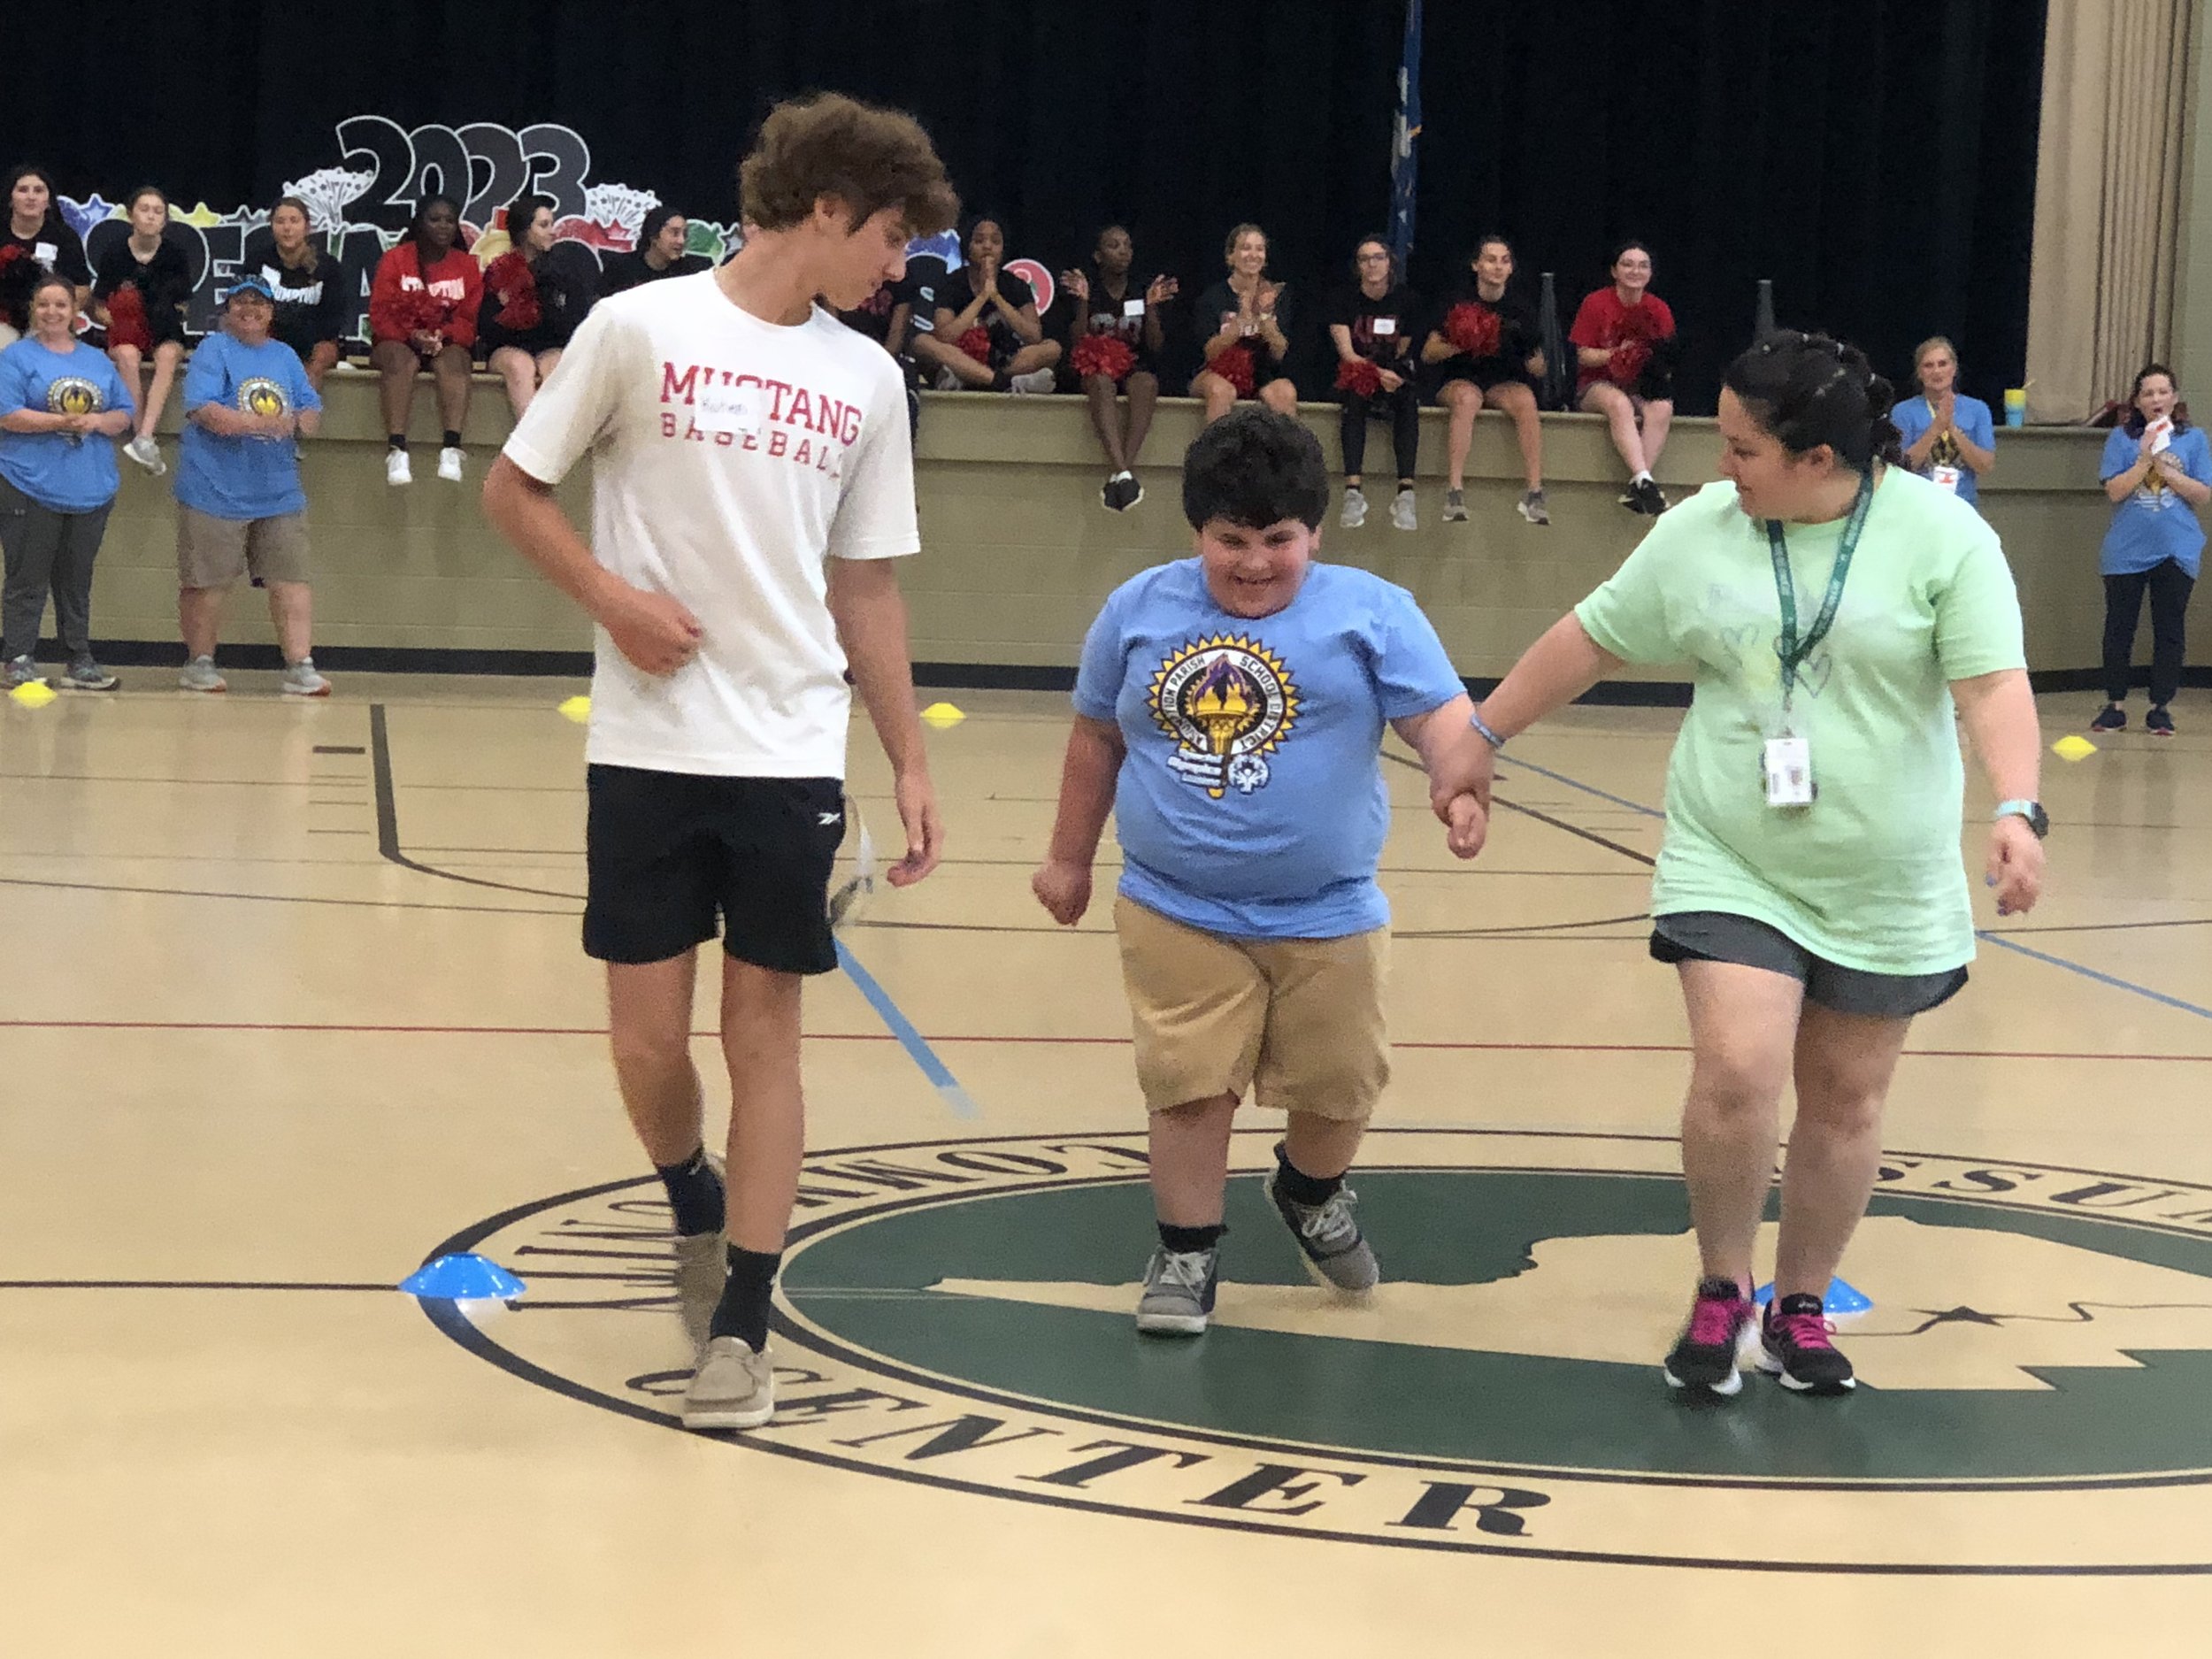  Assumption Parish Public Schools’ Special Olympic Athlete Jaxon Blanchard, center, is assisted by Assumption High School senior Kohen Cavalier, left, and teacher Crystal Aucoin, right, during his race competition. 